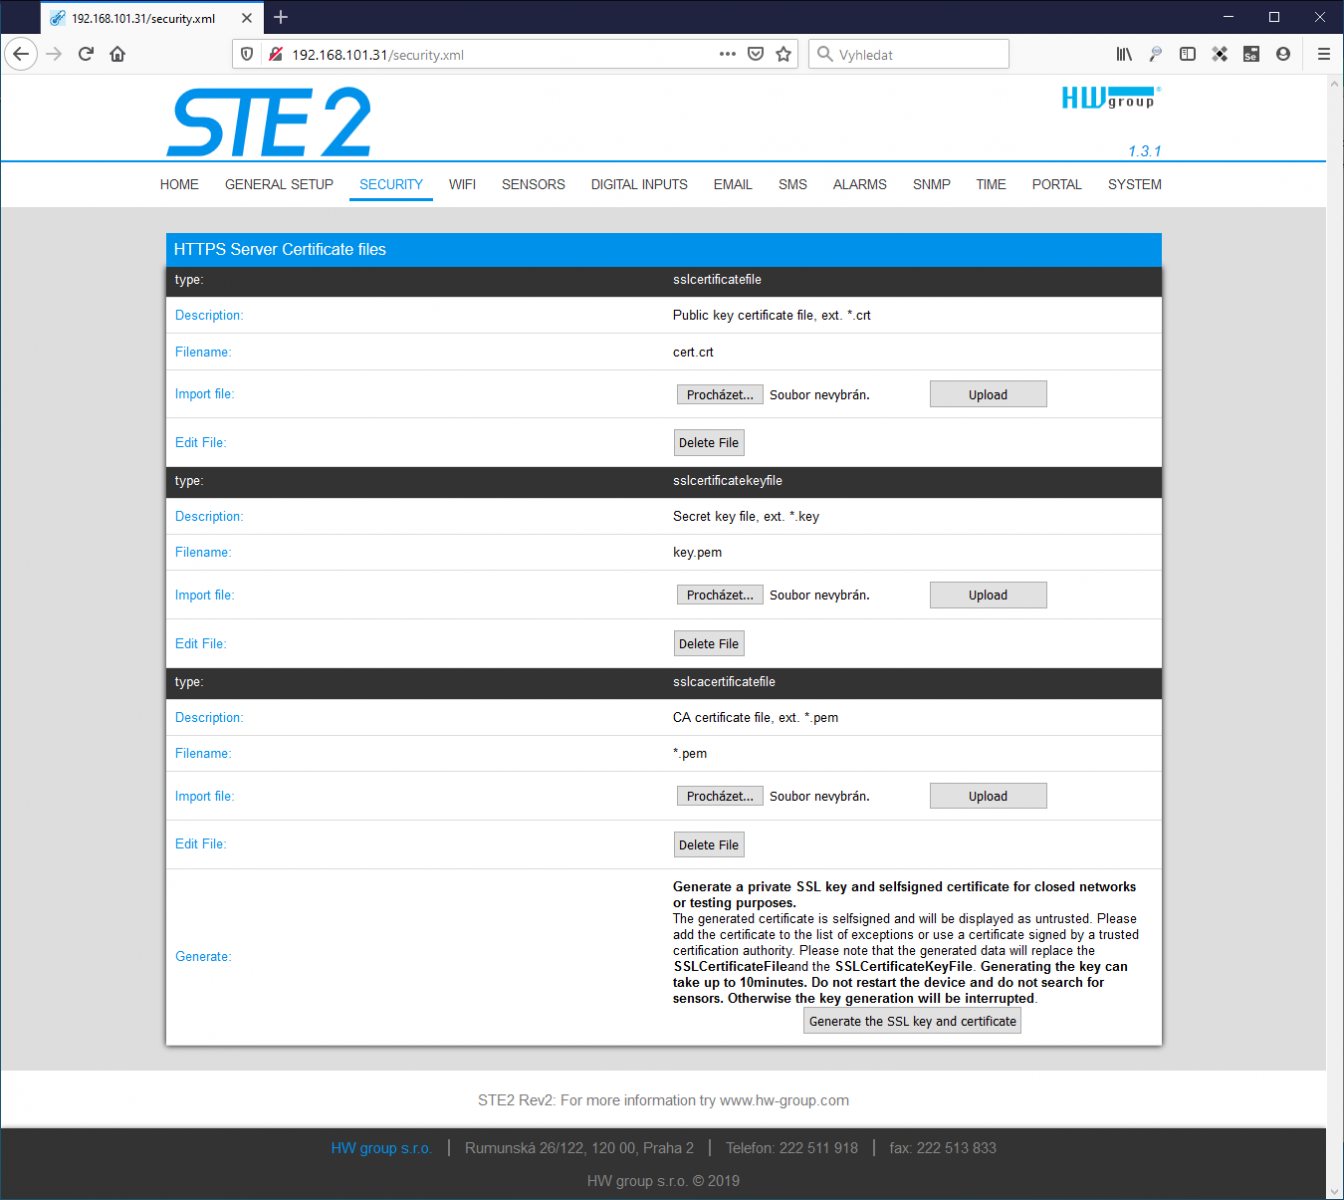 STE2 rev2 now allows access to WWW pages via HTTPS secure communication.